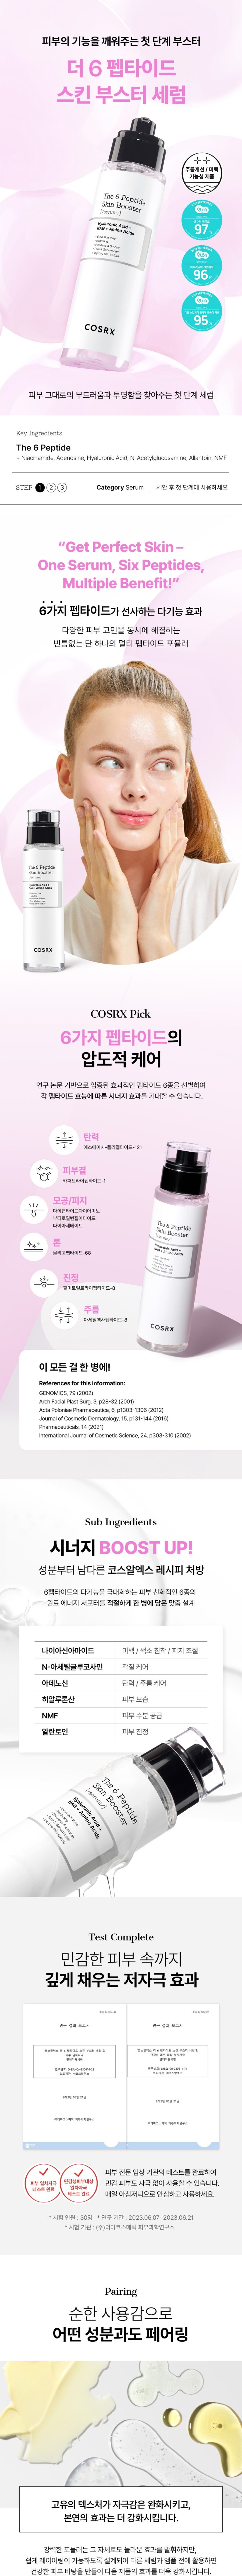 COSRX The 6 Peptide Skin Booster Serum korean skincare product online shop malaysia china india1